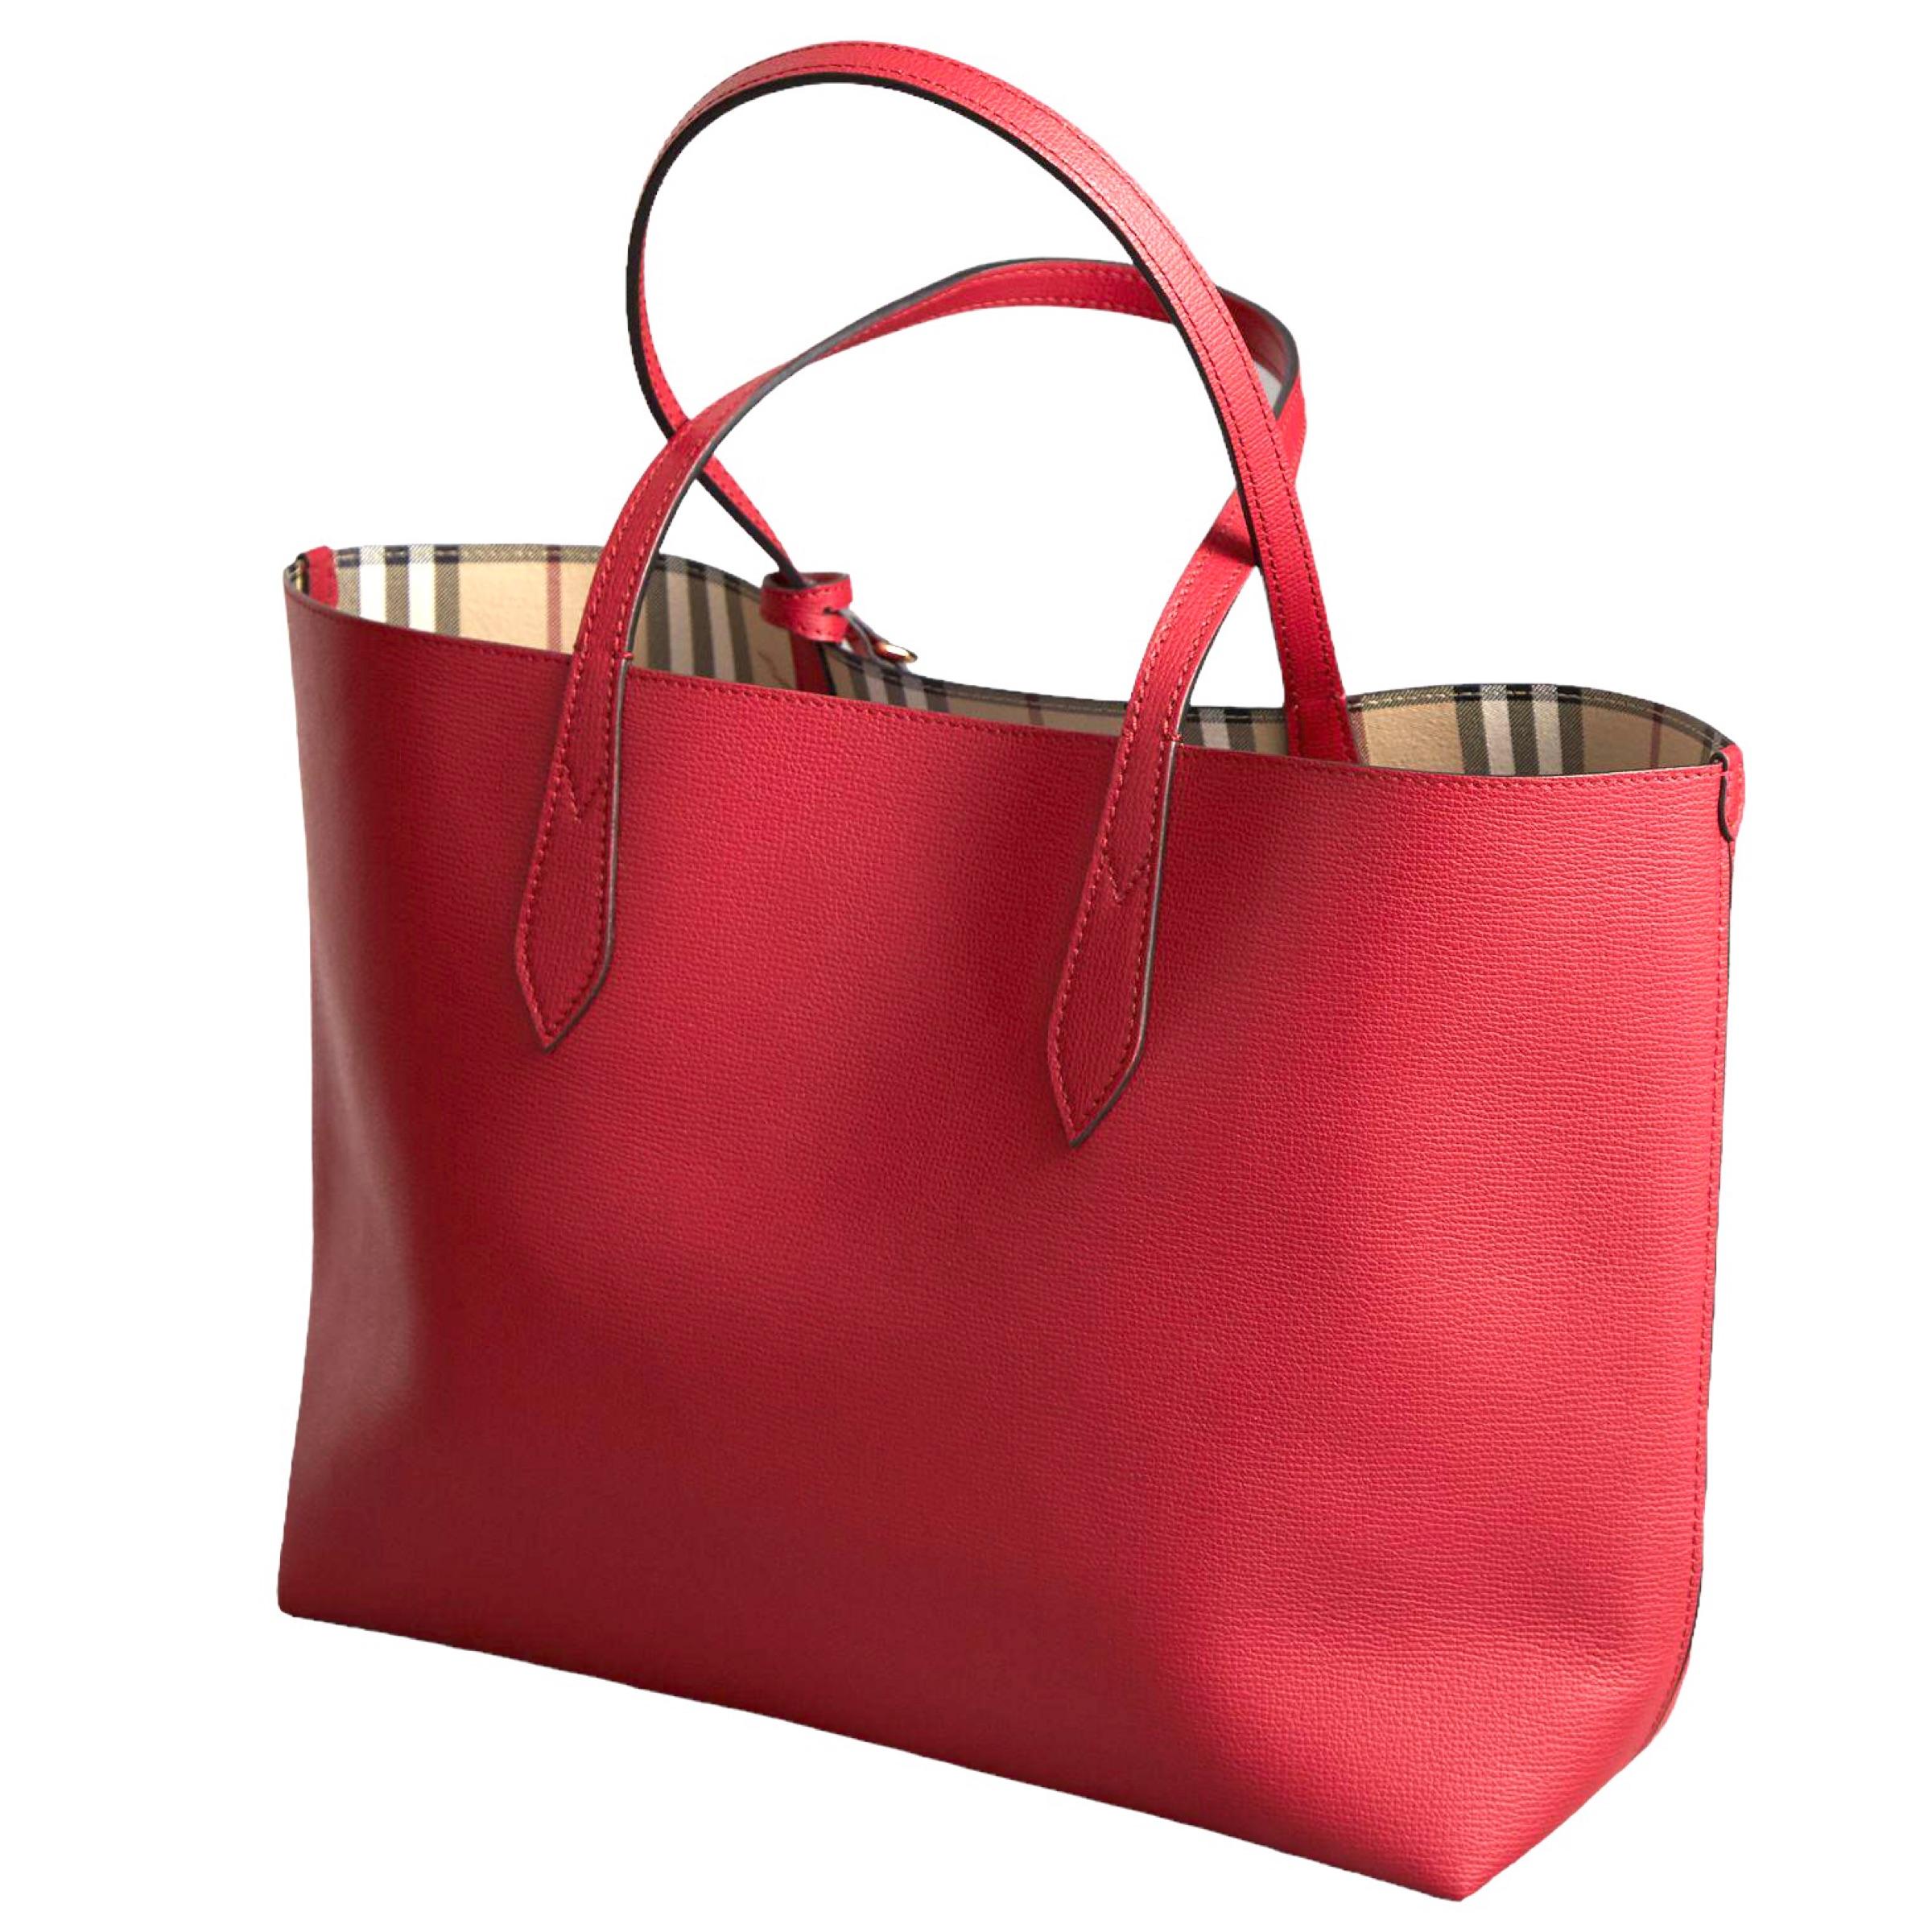 New Burberry Red Haymarket Check Reversible Leather Tote Shoulder Bag

Authenticity Guaranteed

DETAILS
Brand: Burberry
Condition: Brand new
Gender: Women
Category: Tote bag
Color: Red
Material: Leather
Haymarket check pattern
Reversible style
Top